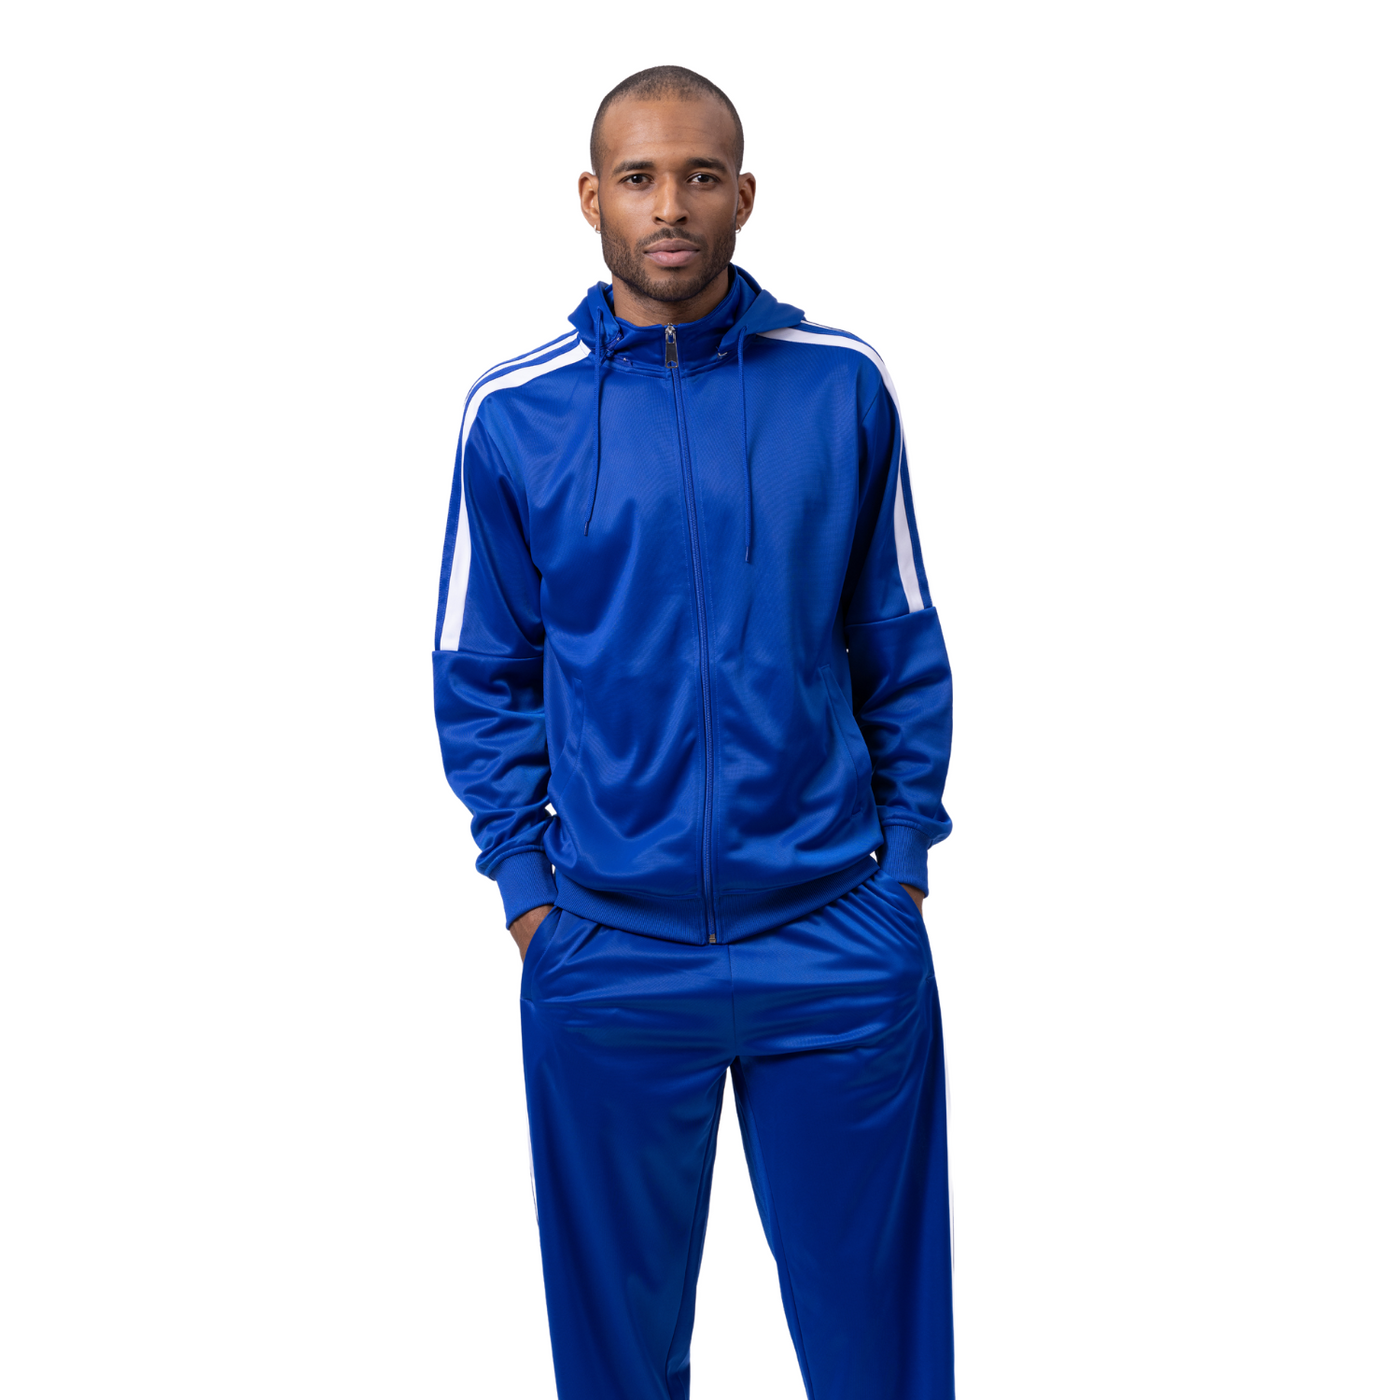 Men's Tracksuits for Active Comfort | SuitsAndMore – Suits & More